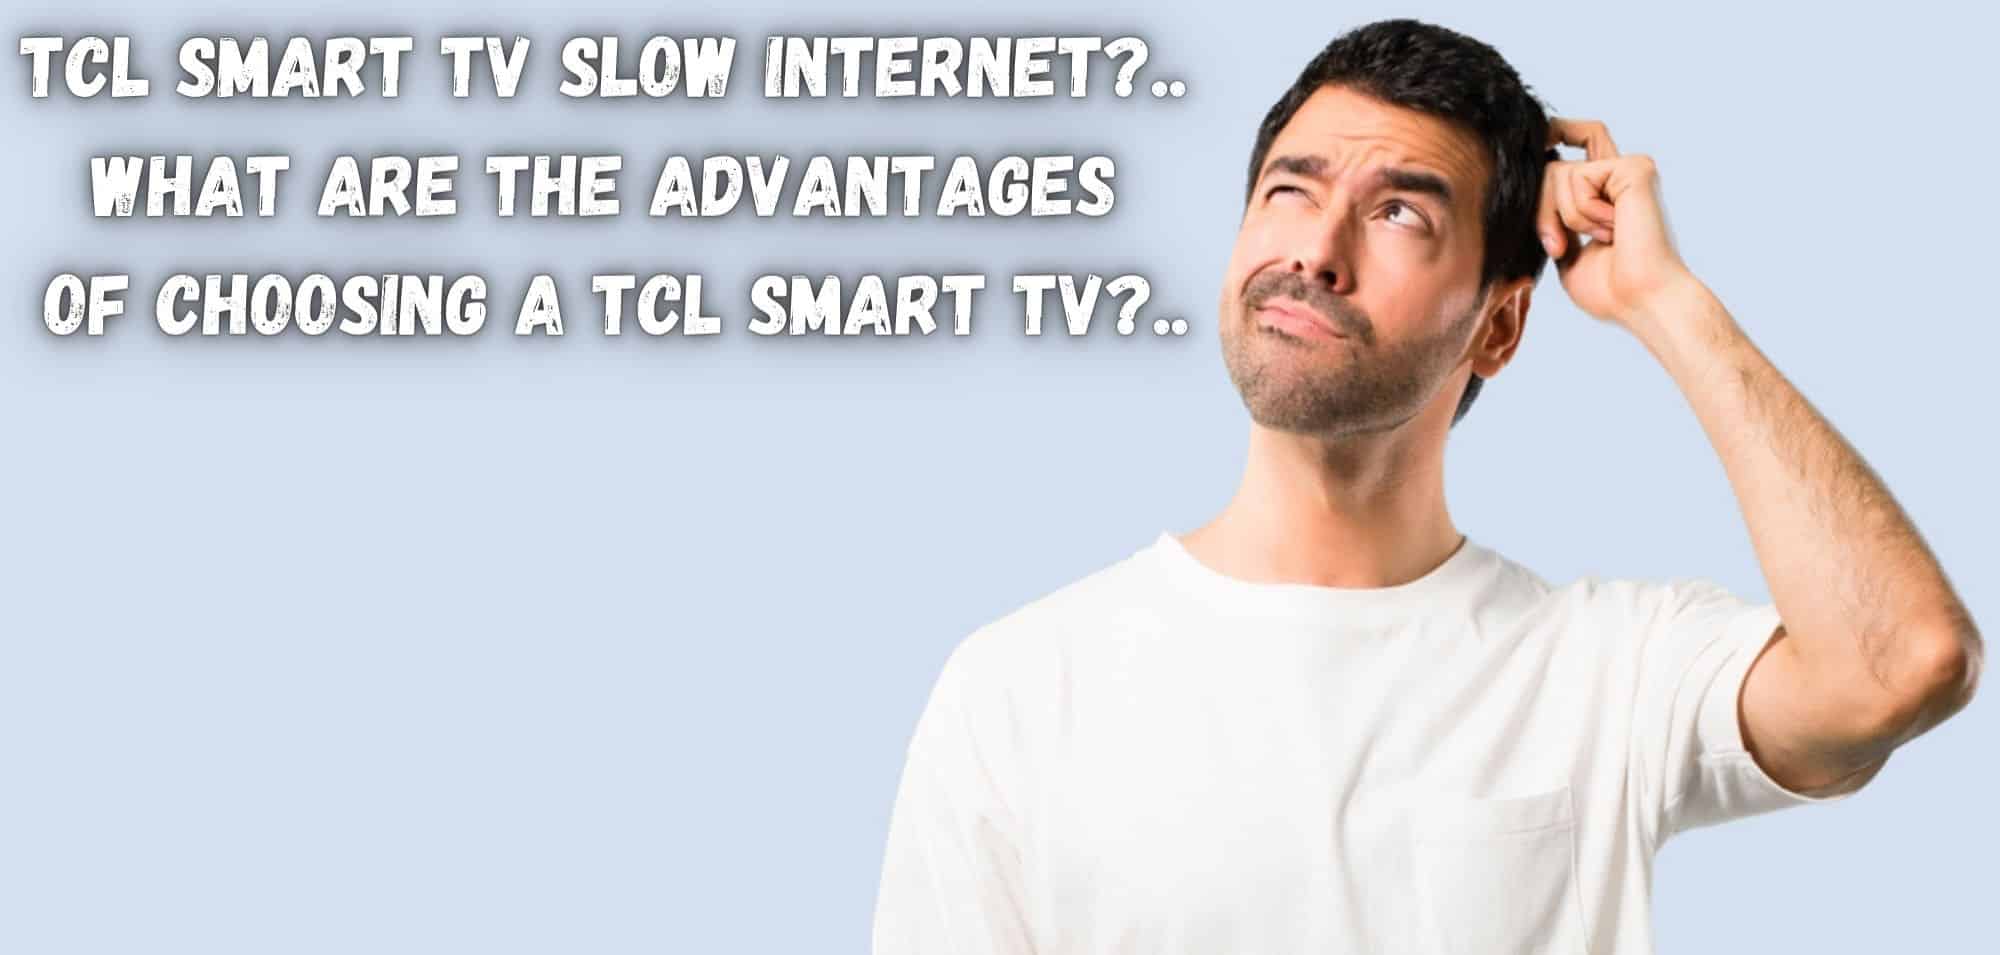 TCL Smart TV Slow Internet What are the advantages of choosing a TCL Smart TV